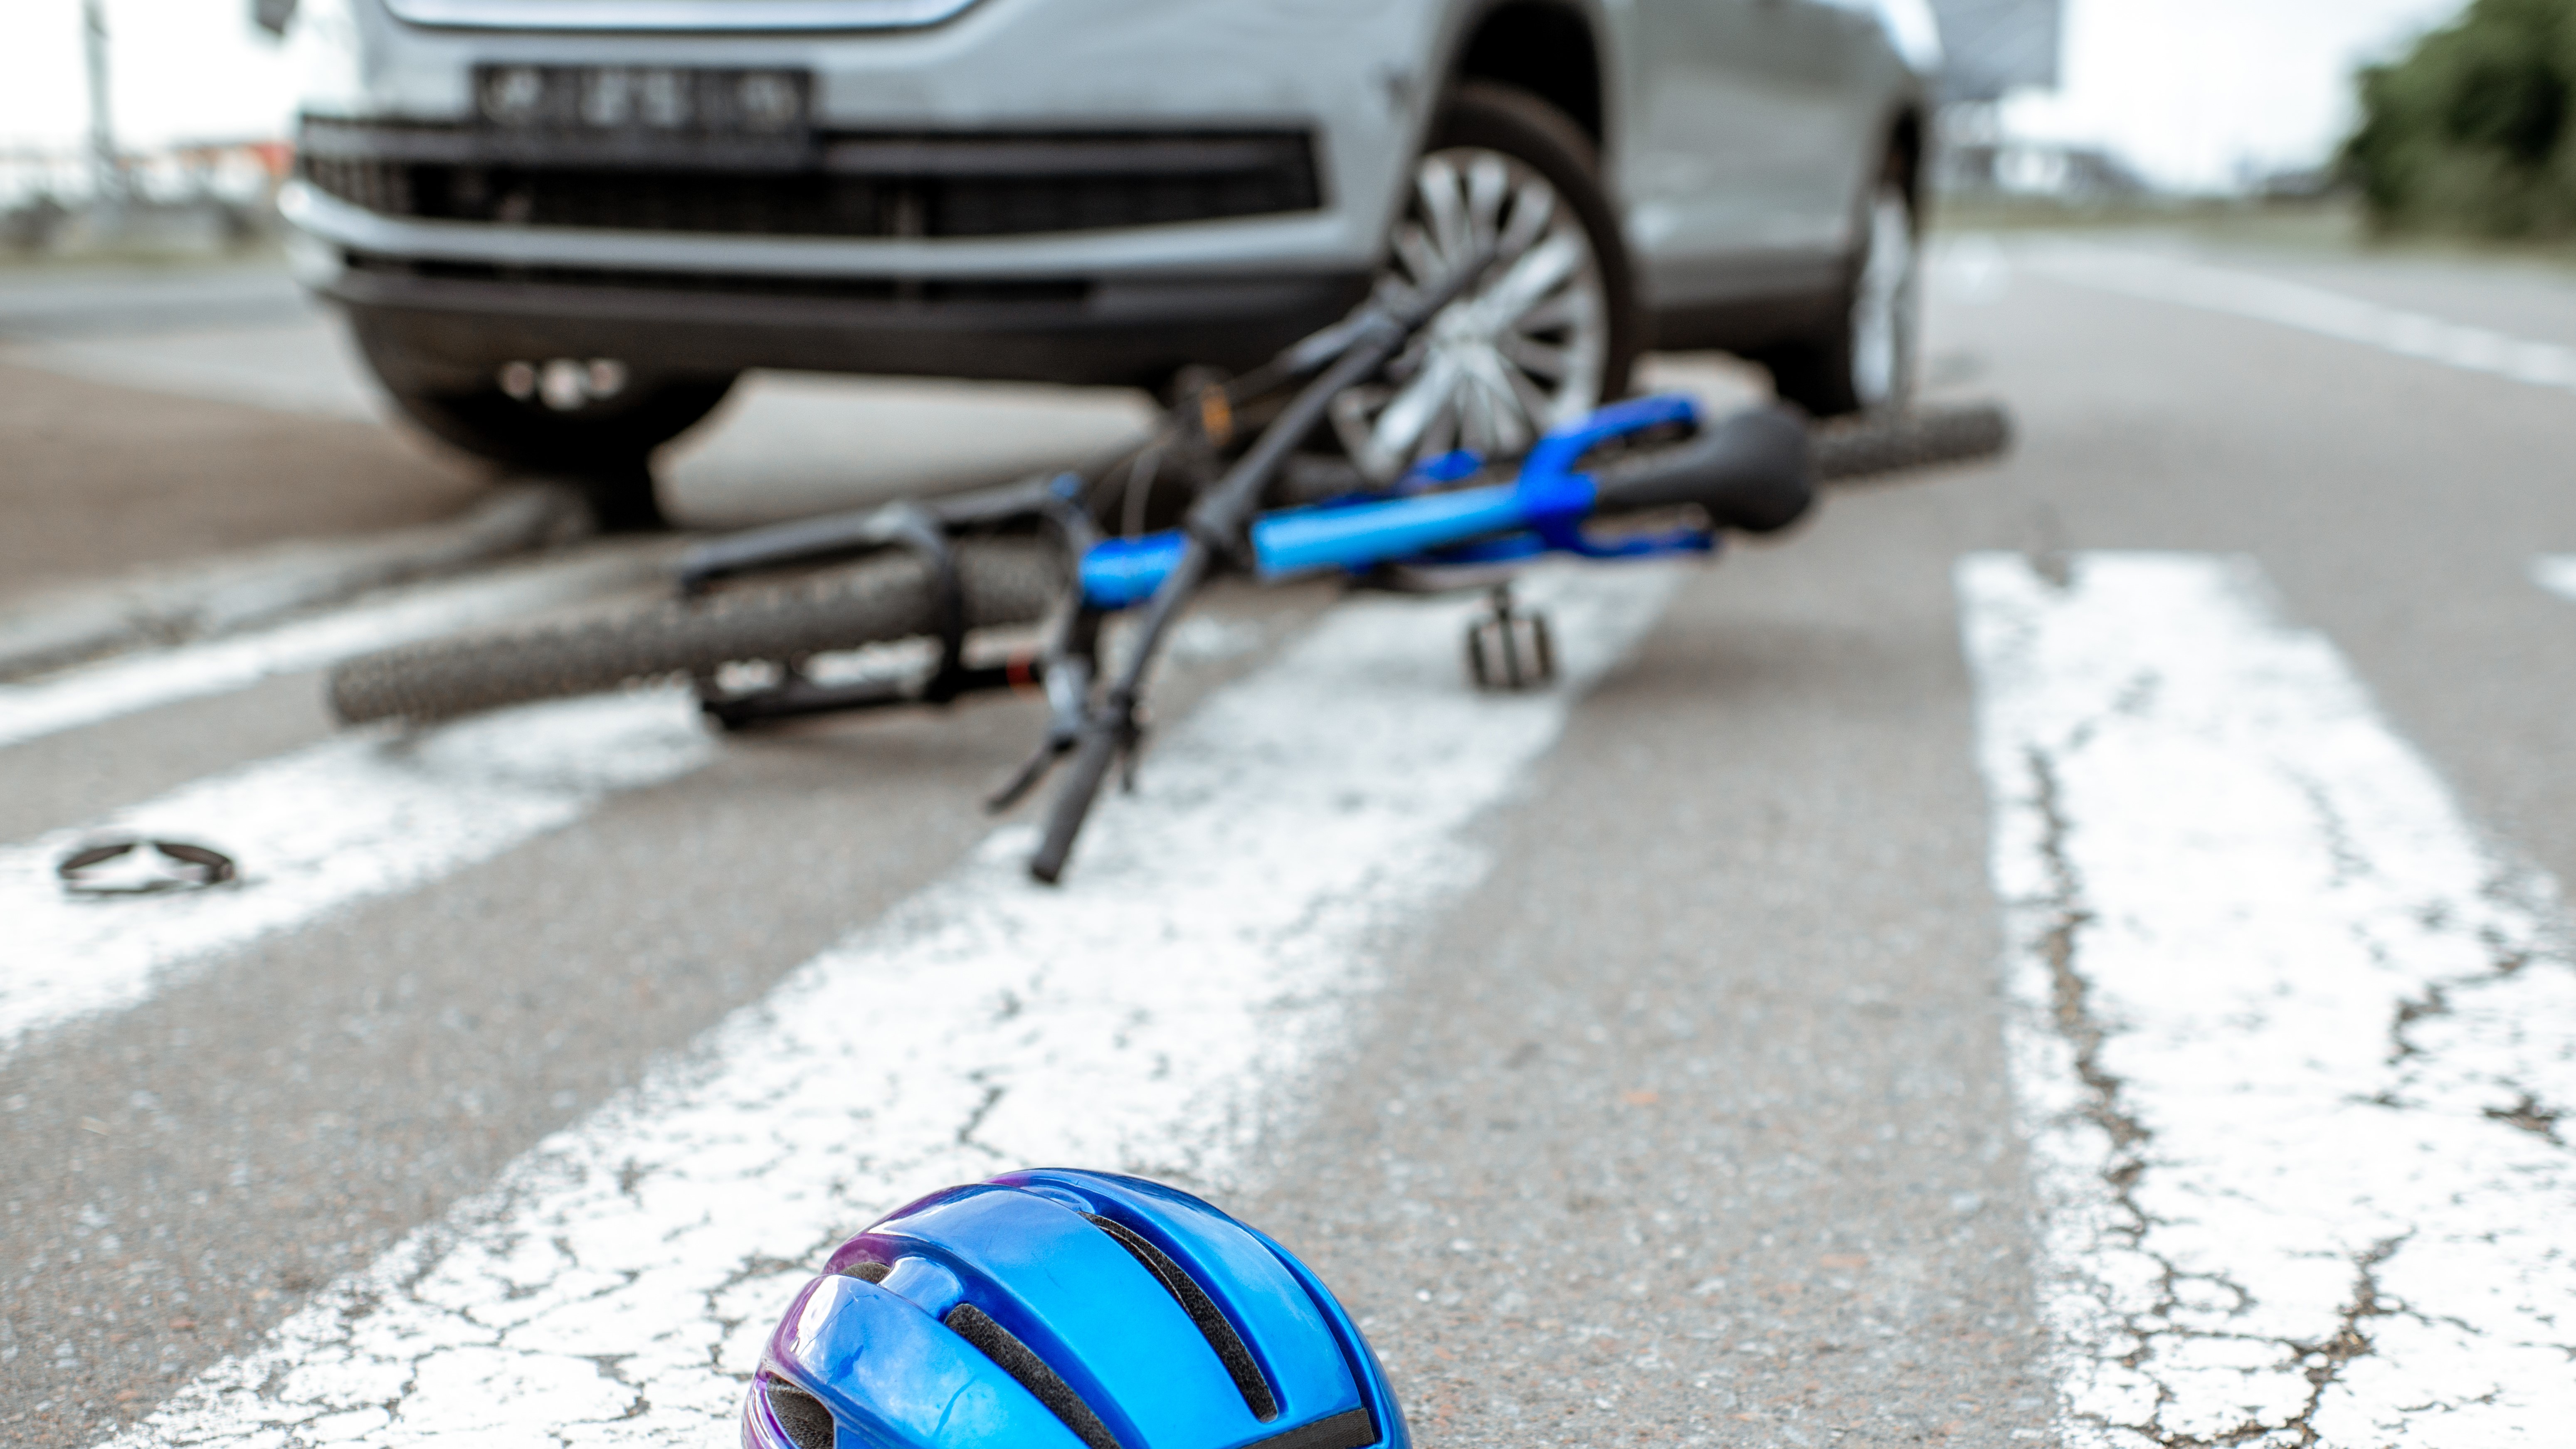 Scene of a road accident with car and broken bicycle lying on the pedestrian crossing. Helmet on the foreground